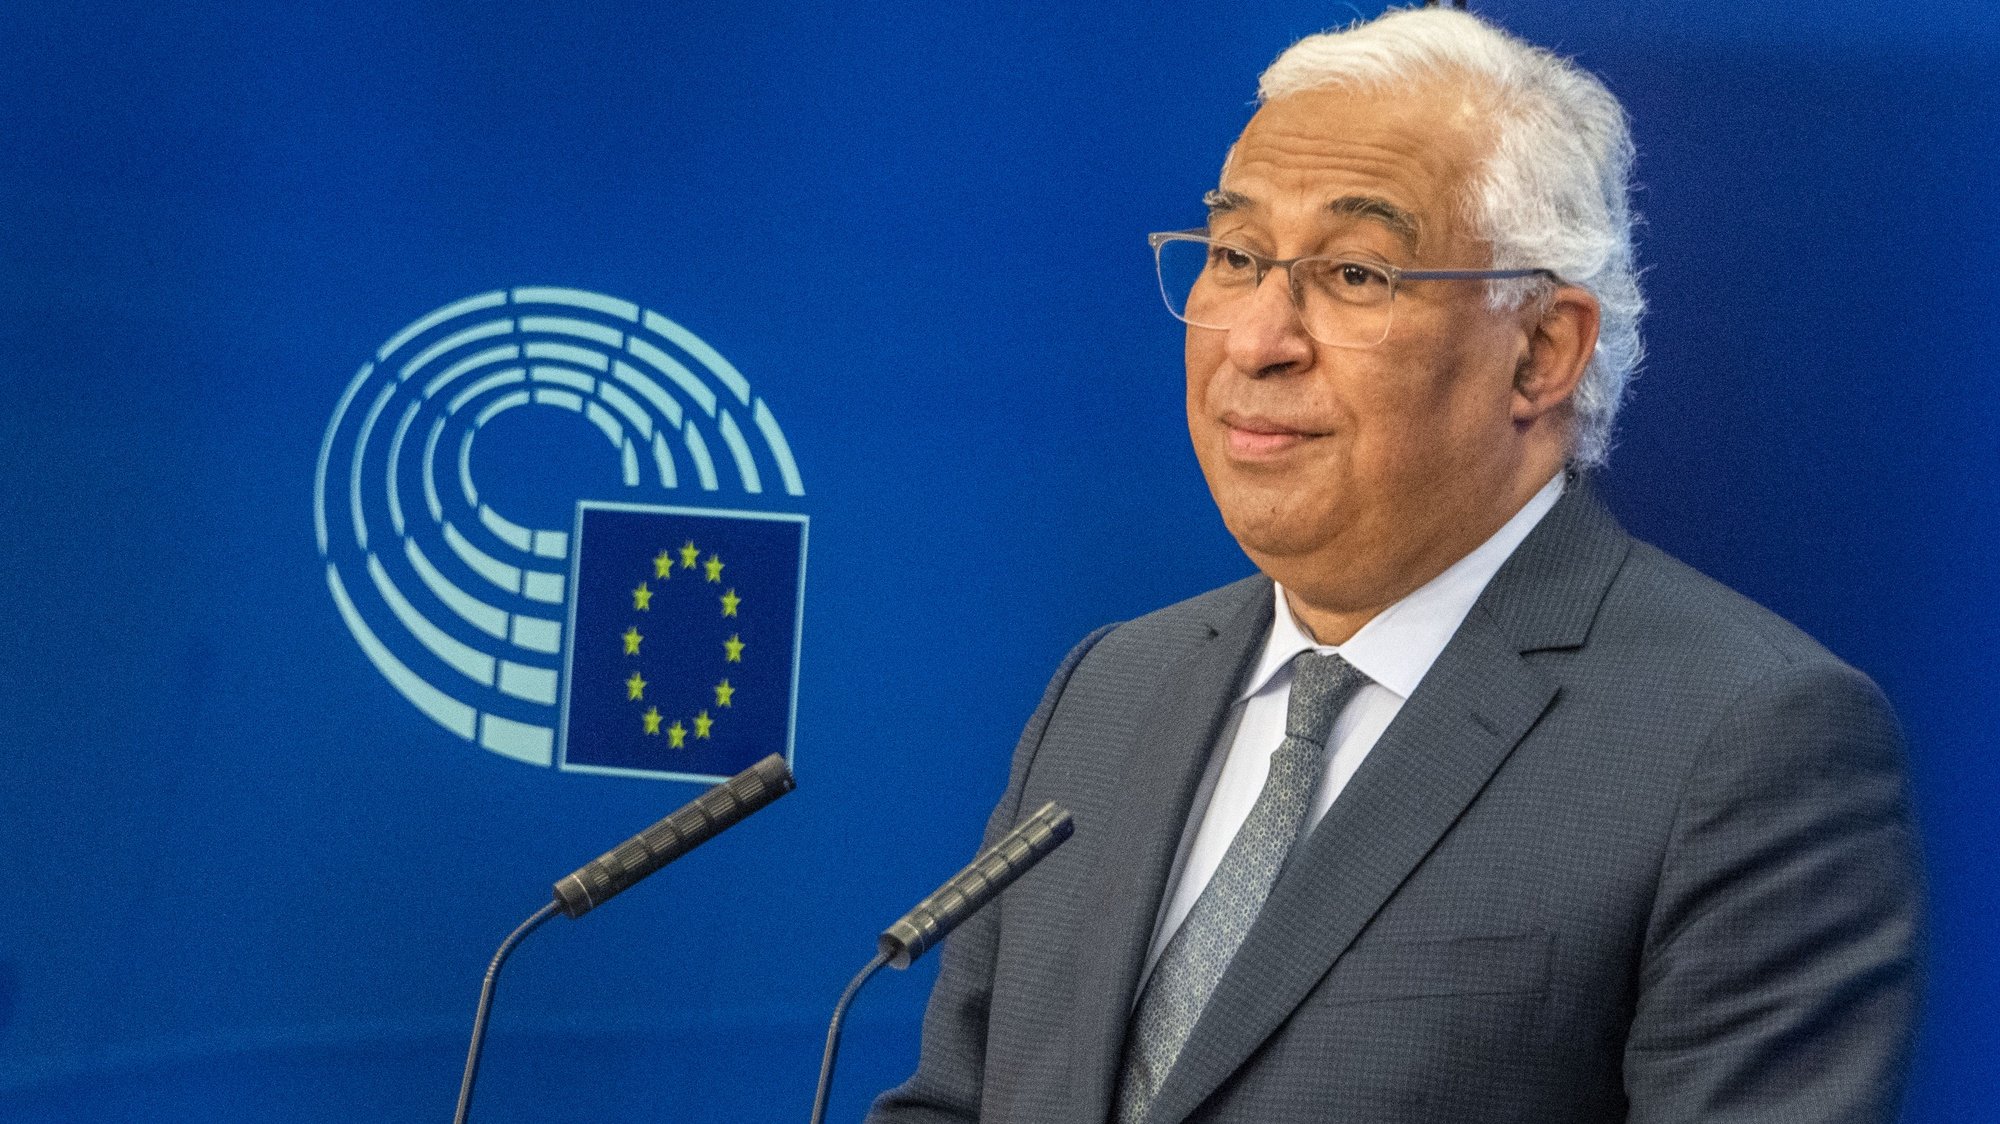 Portugal&#039;s Prime Minister Antonio Costa attends a press conference after signing the Recovery and Resilience Facility (RRF) agreement in Brussels, Belgium, 12 February 2021. The European Parliament greenlighted the EU&#039;s proposed Recovery and Resilience Facility (RRF), worth 672.5 billion euros to tackle the economic aftermath of the coronavirus pandemic, during its plenary session in Brussels on 10 February 2021. TONY DA SILVA/LUSA